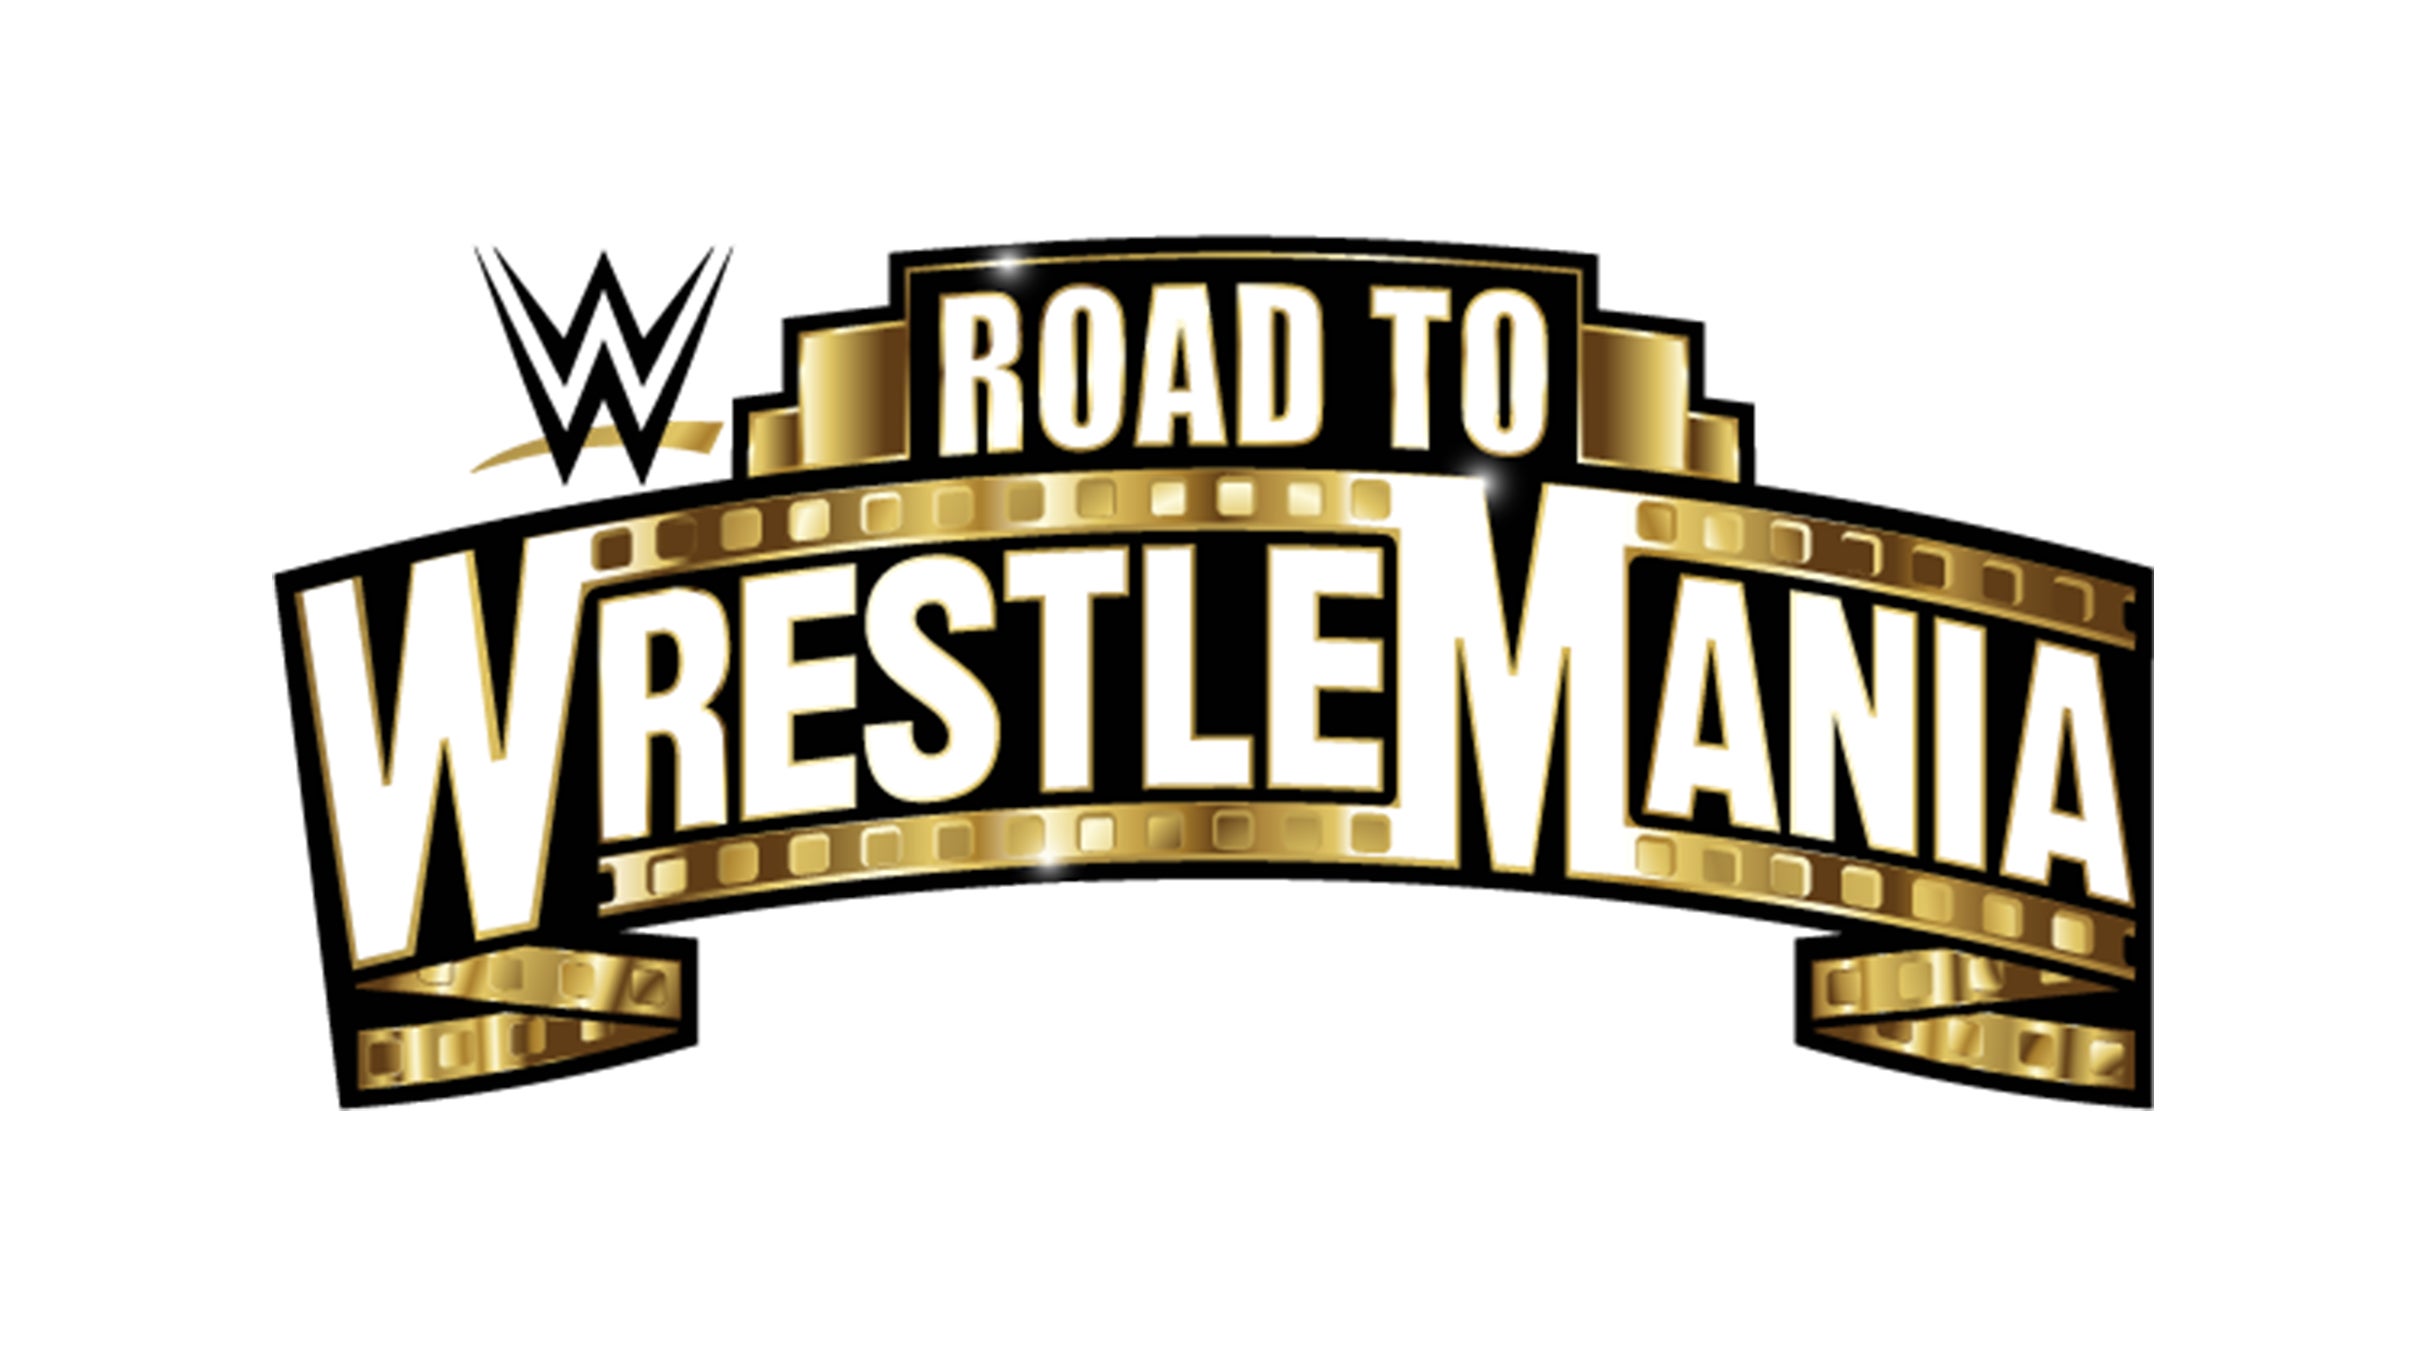 WWE Road To WrestleMania Results (03/12): New York City